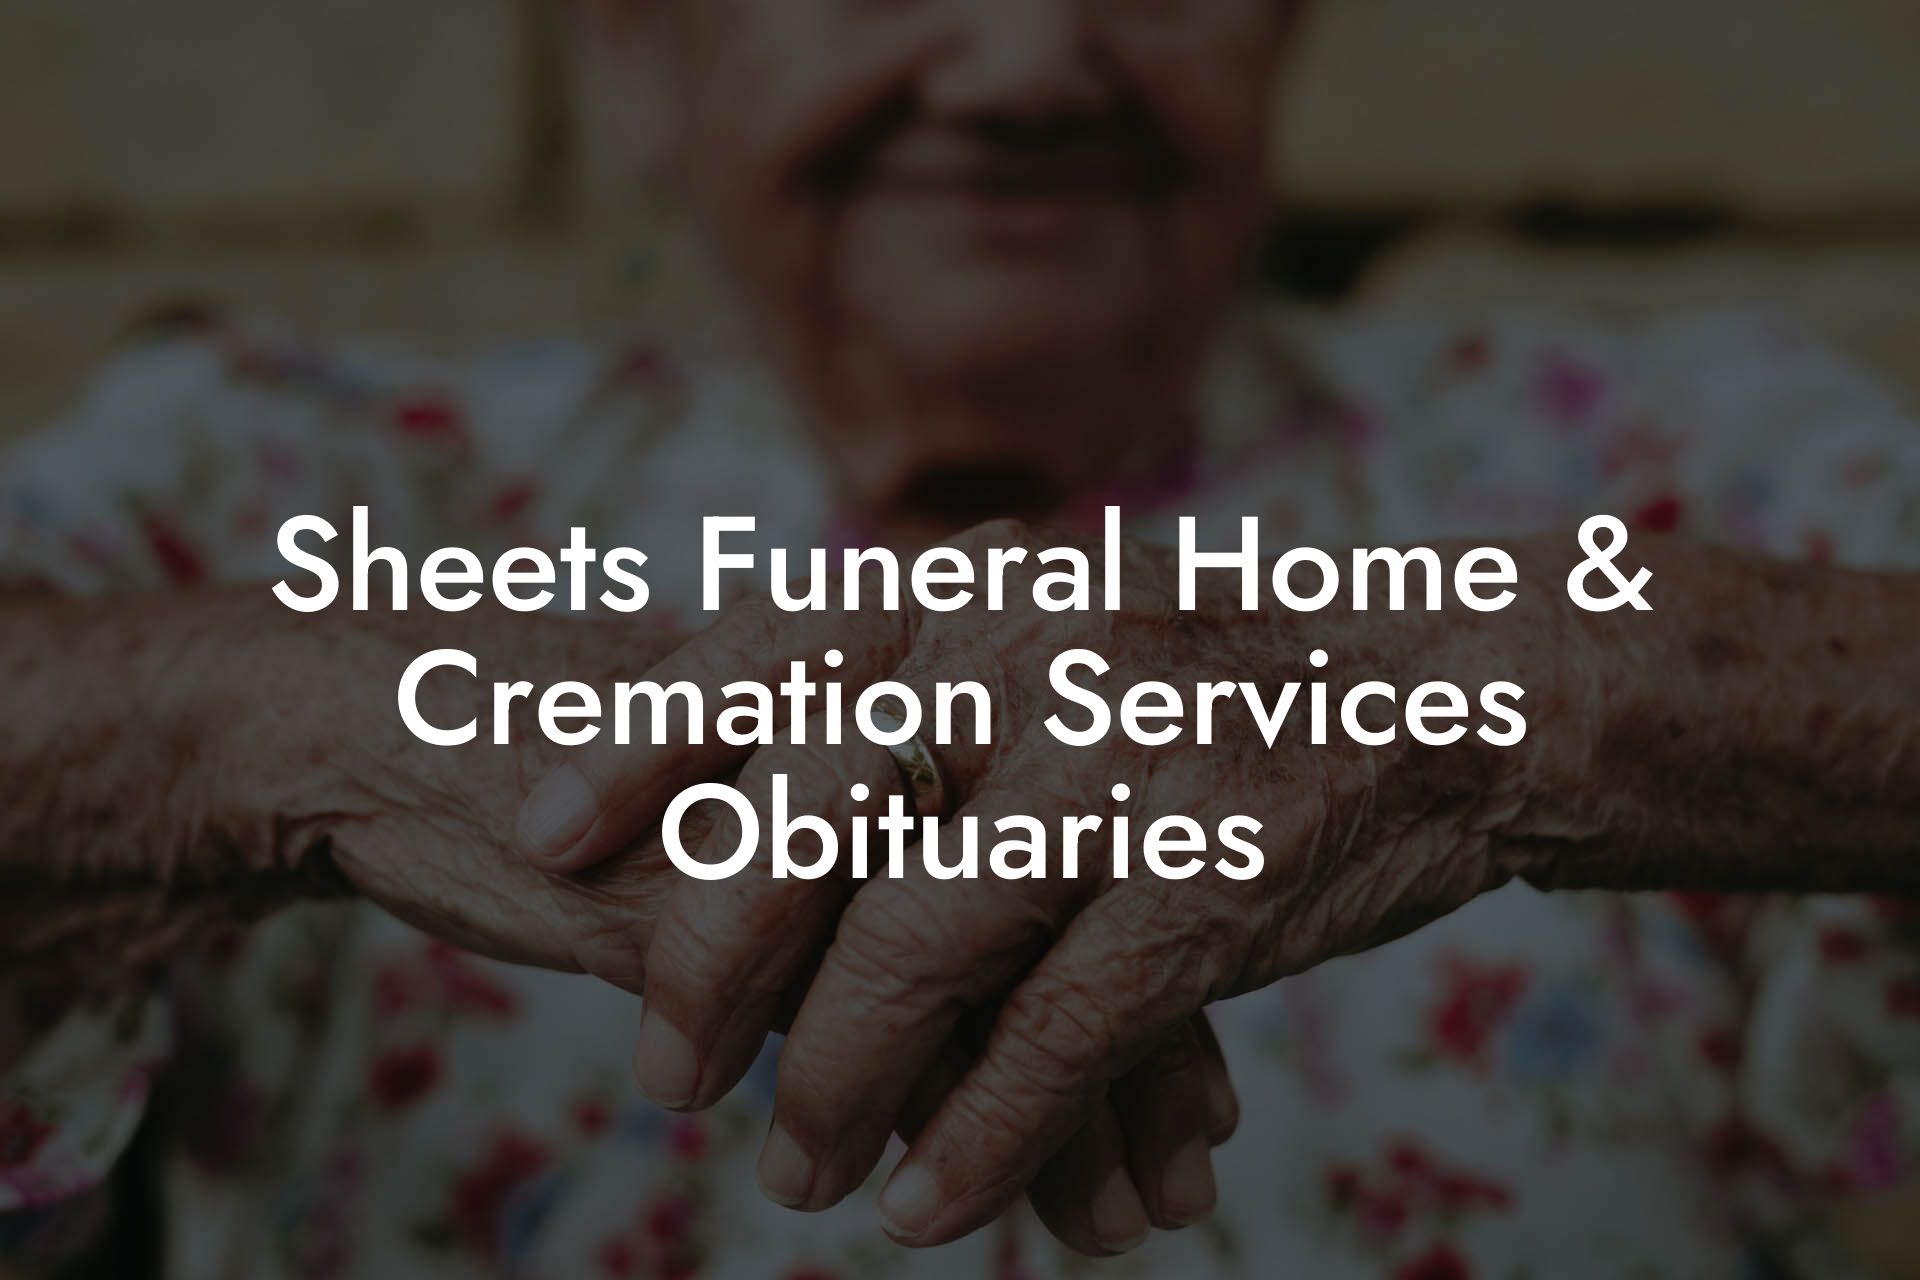 Sheets Funeral Home & Cremation Services Obituaries